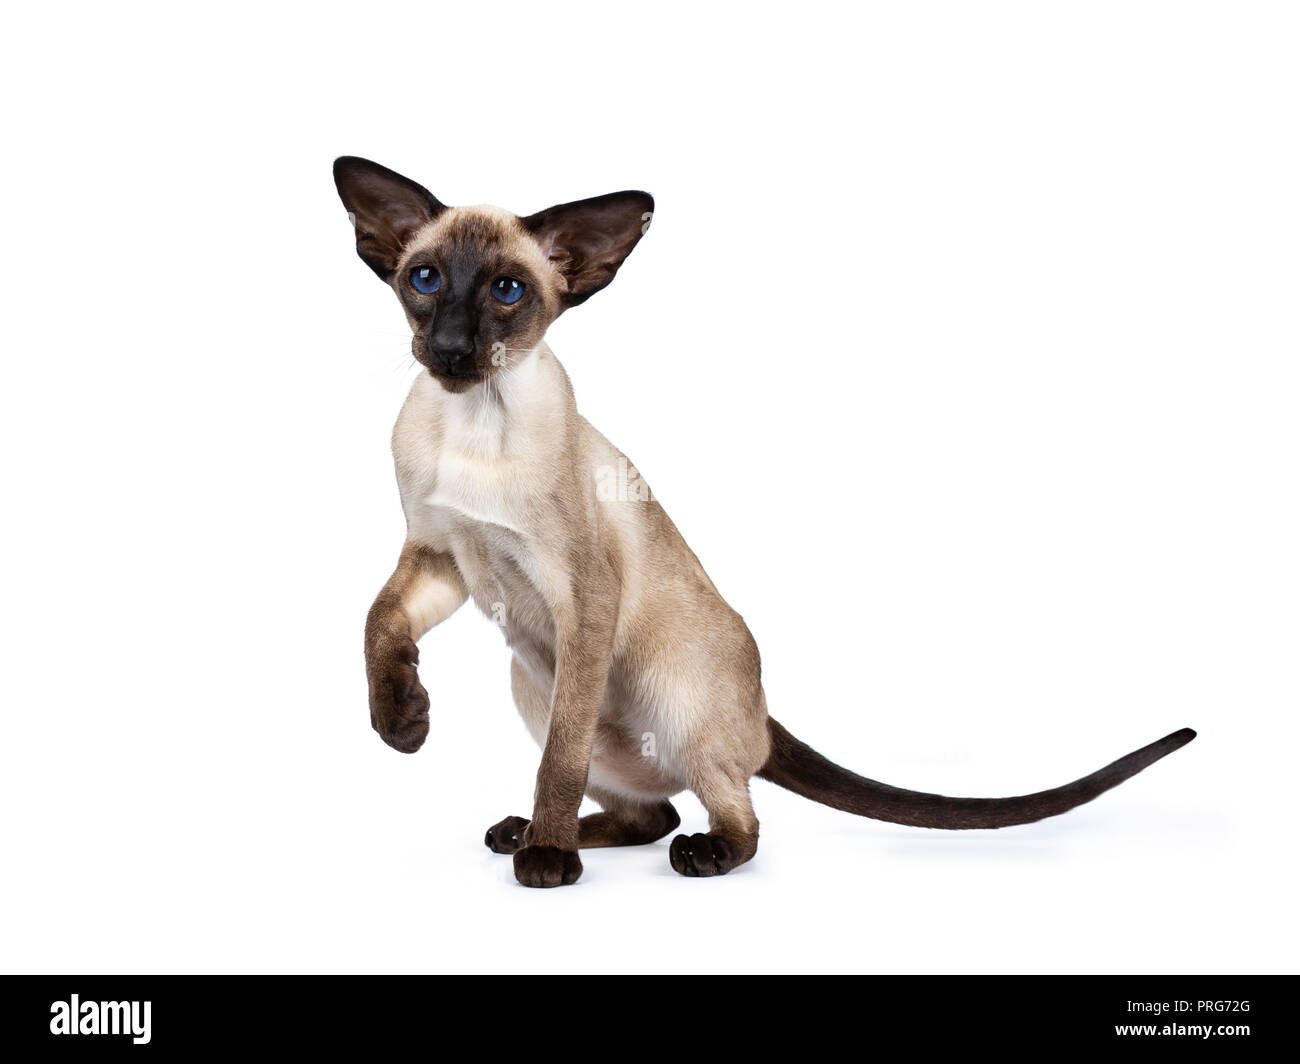 Excellent seal point Siamese cat kitten sitting / playing standing side ways / front view looking besidelense, isolated on white background and one pa Stock Photo